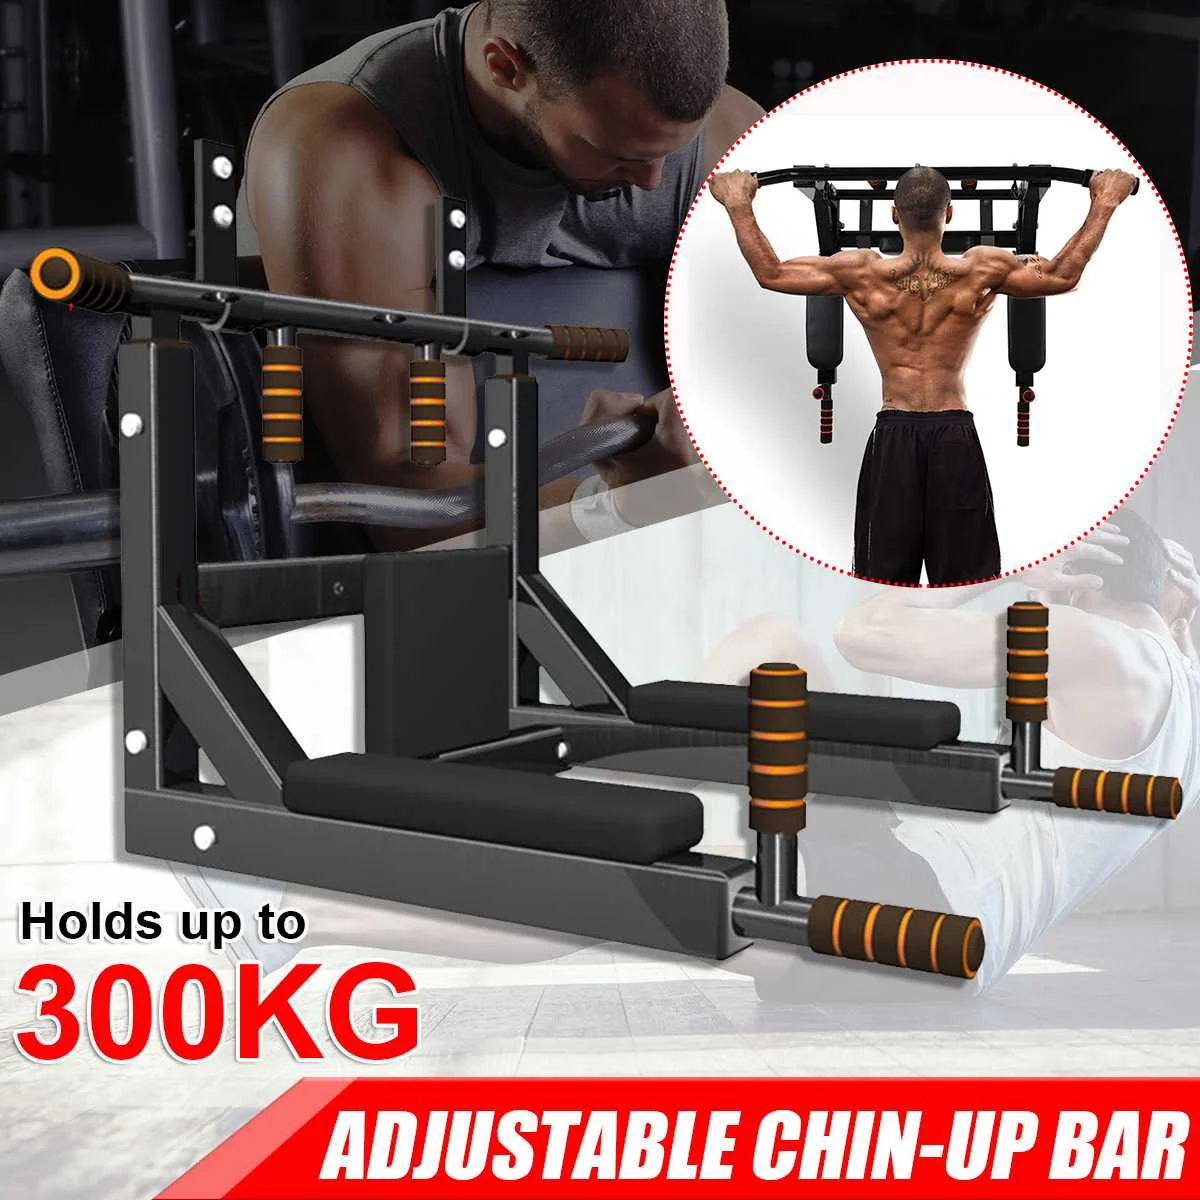 Permalink to NEW Multi Wall Mounted Pull Up Bar Dip Station Loading 300 KG Chin Up Bar Fitness Equipment for Home Gym Sport Workout